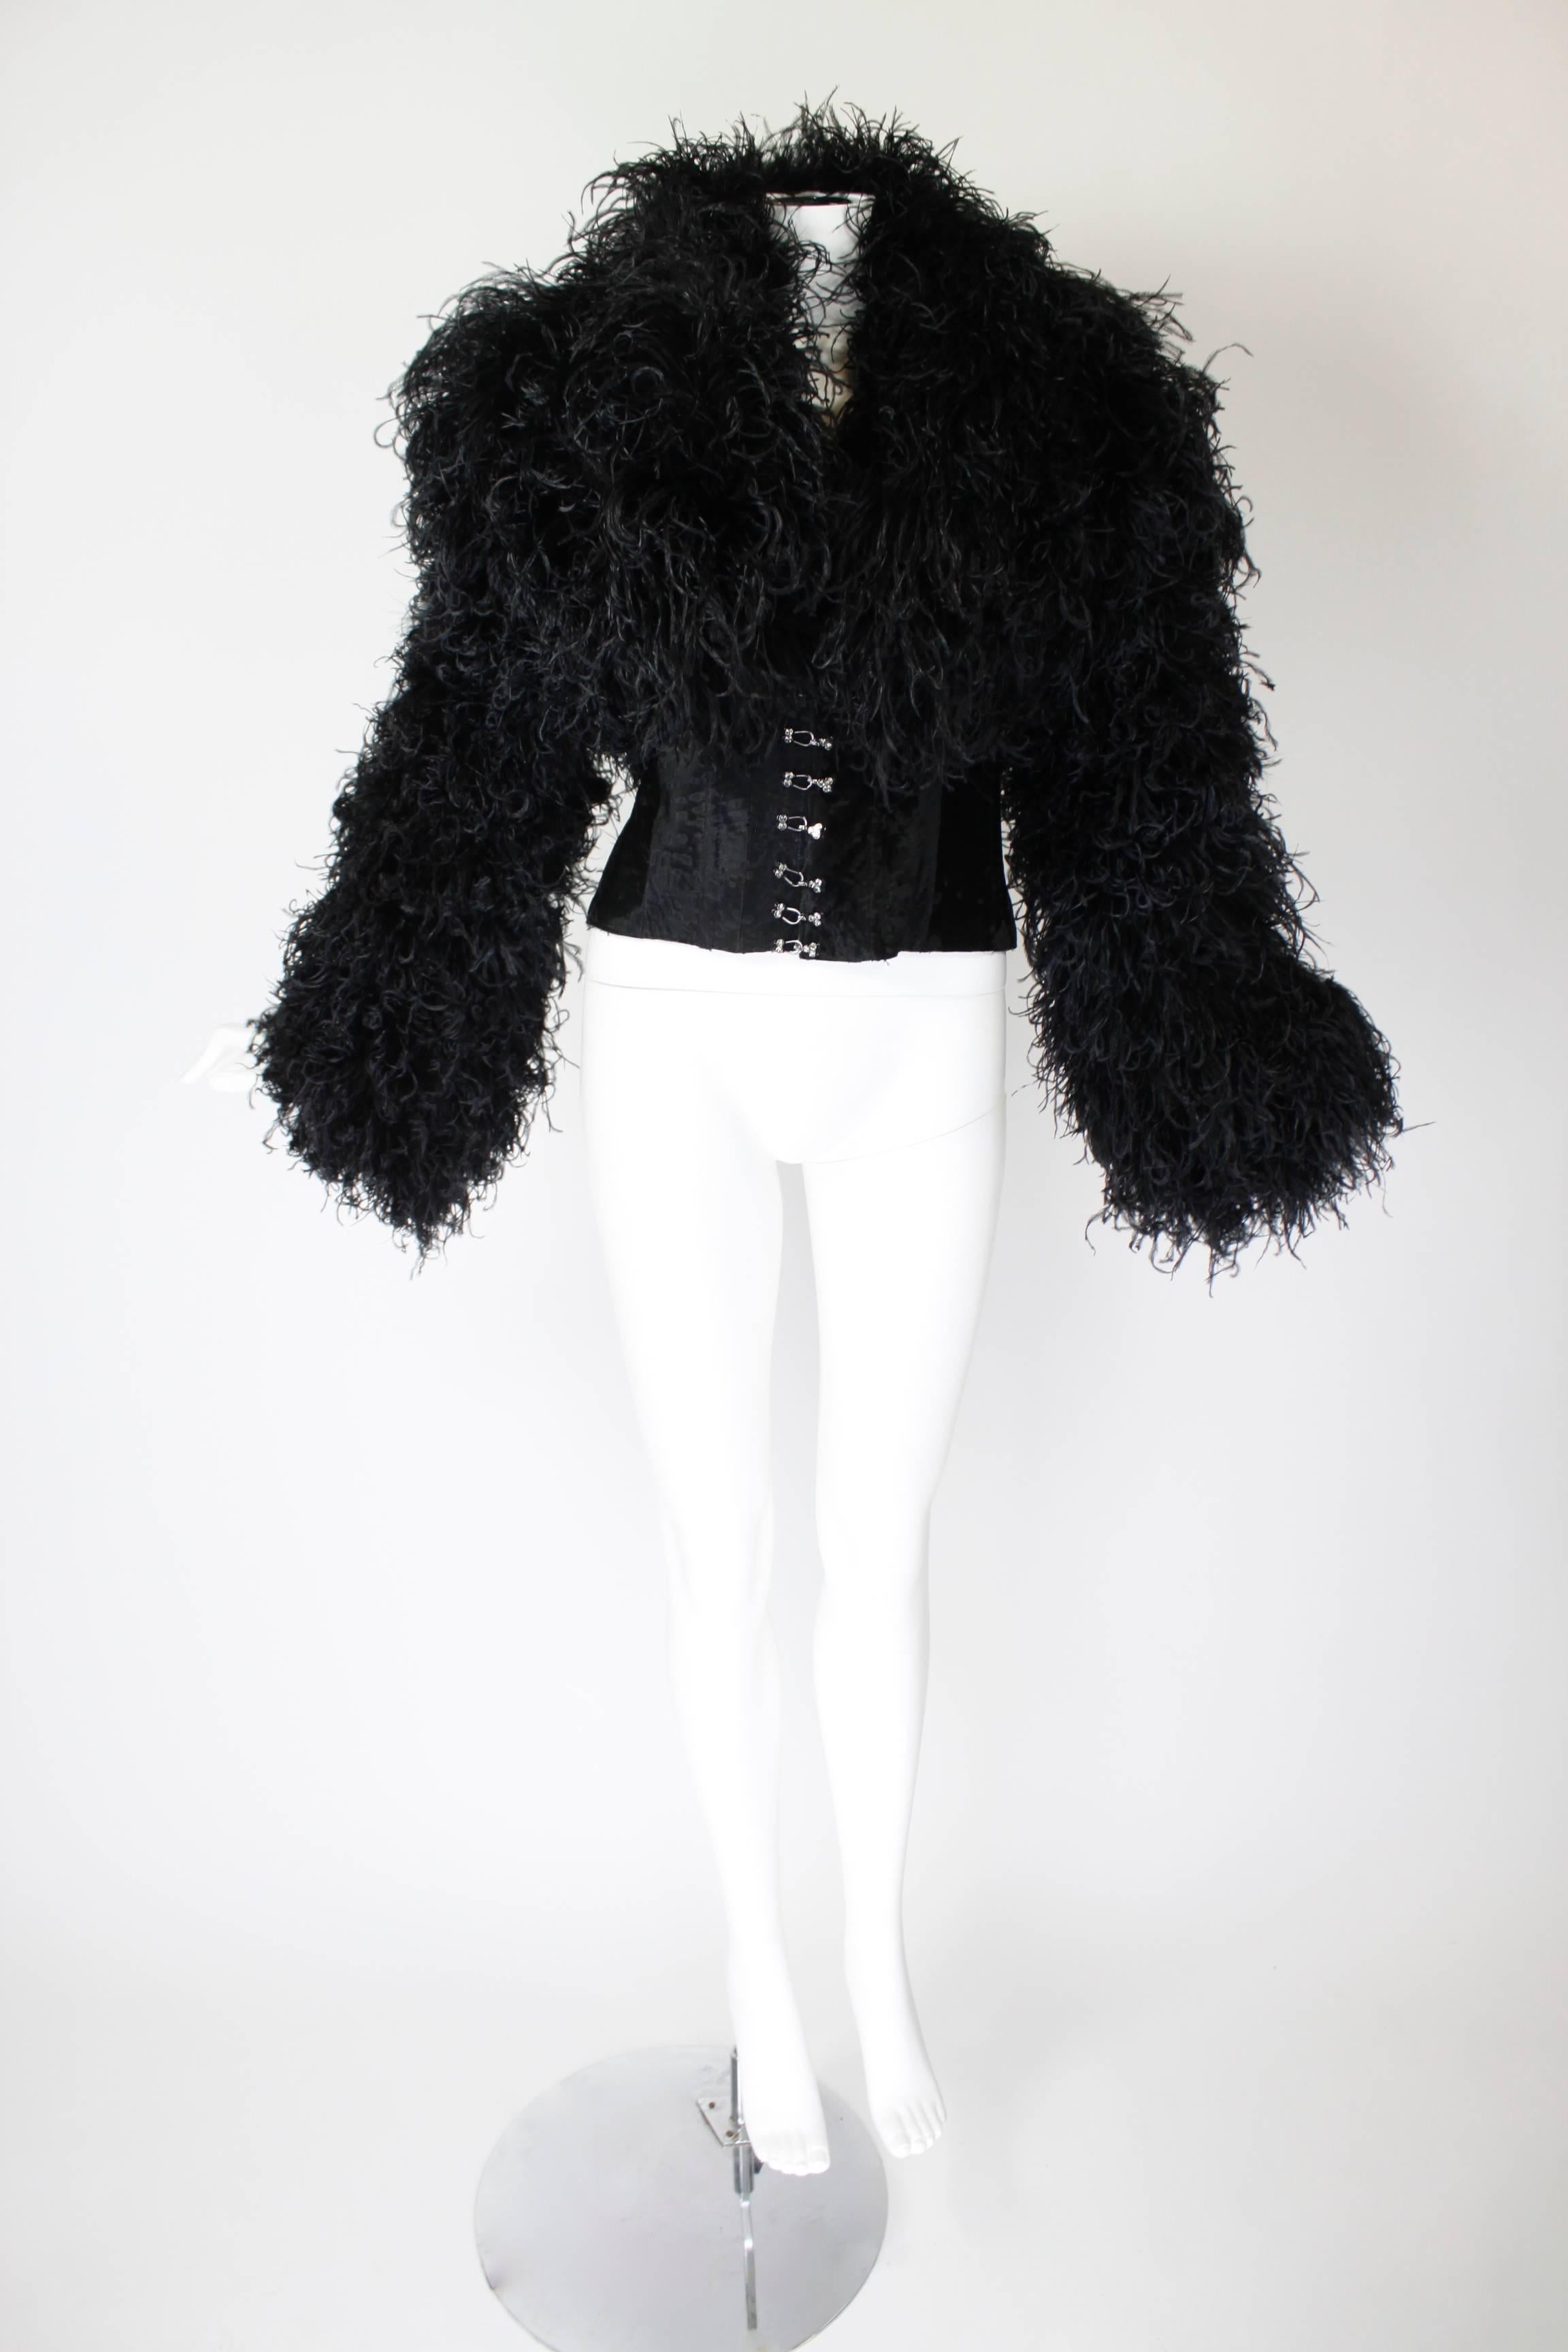 This wonderful evening jacket is done in luxe curled ostrich feather, creating unique, beautiful texture. The ultra fitted waist is done in karakul fur and features hook-and-eye closures with rhinestone detail. Partially lined in